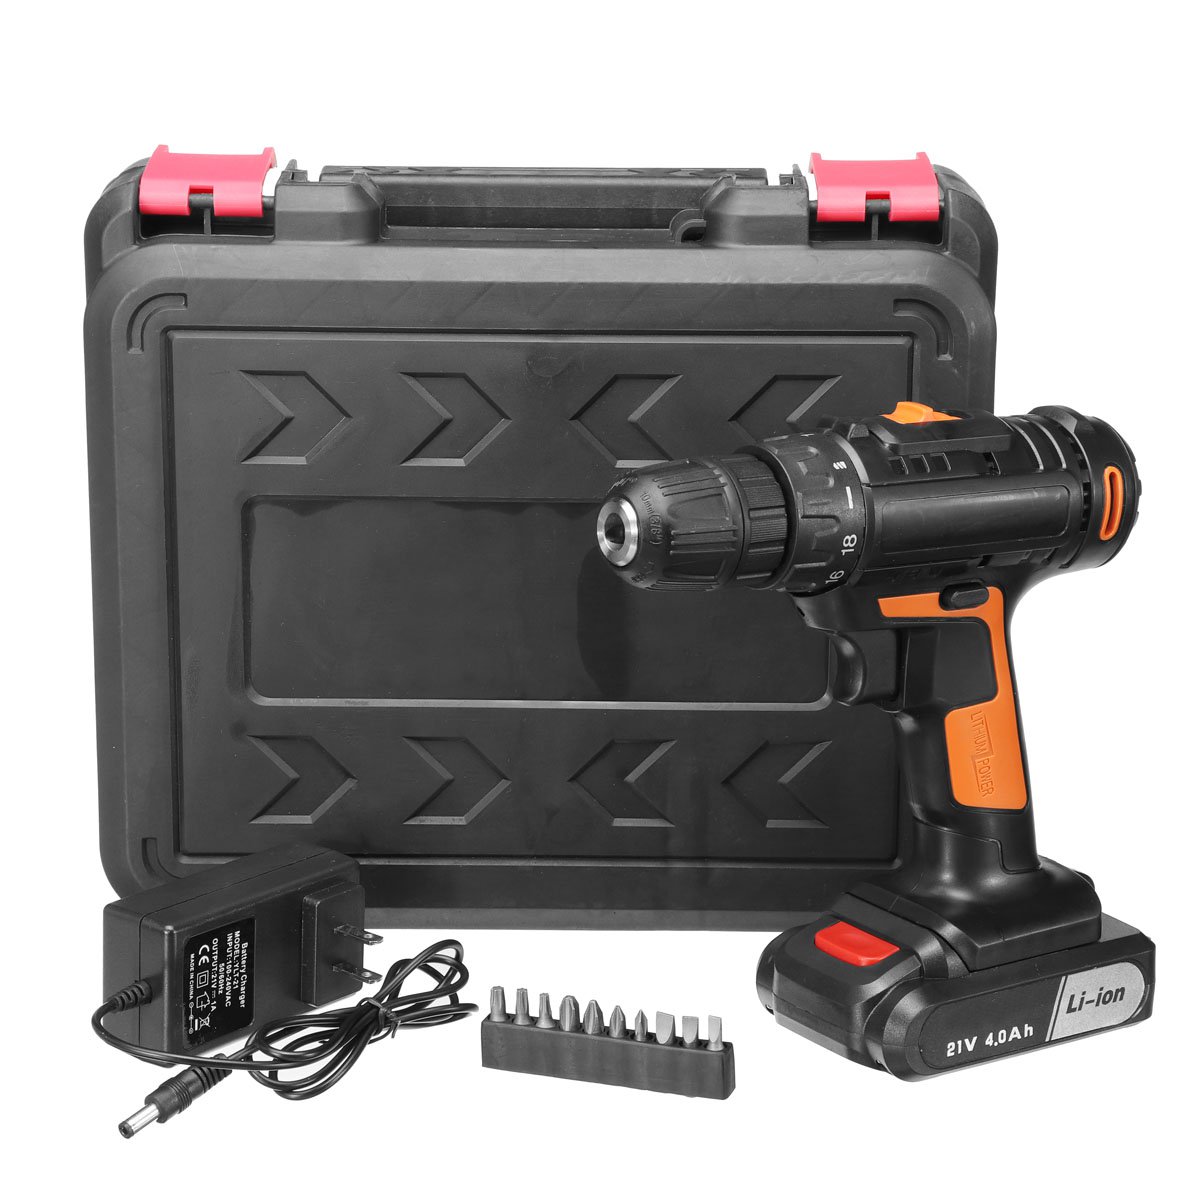 21V-4000mAh-Cordless-Power-Drills-181-Electric-Screw-Driver-Rechargeable-with-1-Li-ion-Battery-1400101